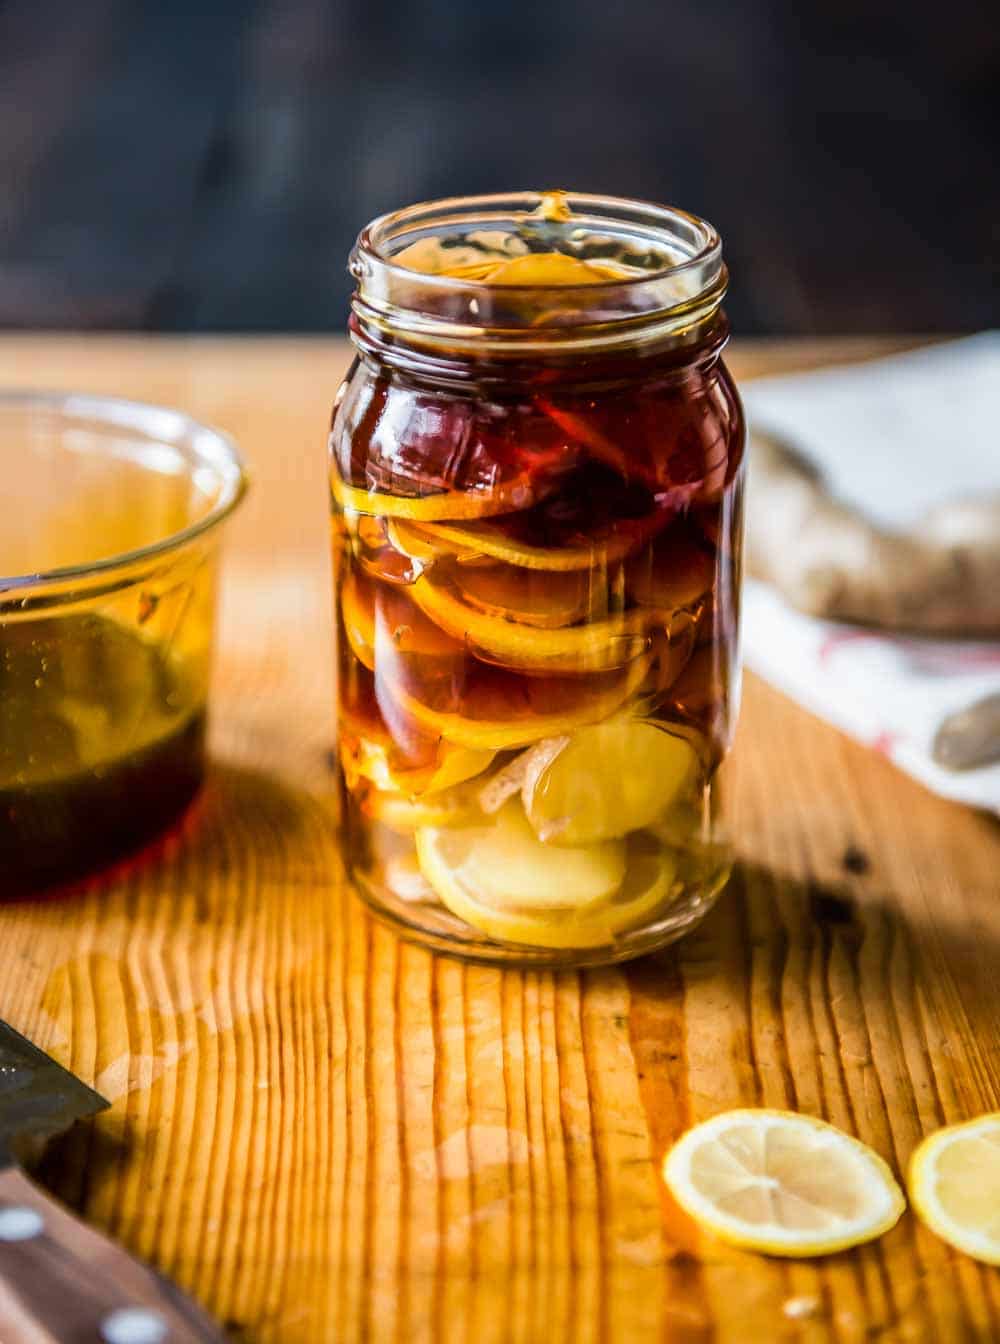 Home remedy for sore throat in a glass jar with honey, lemon and ginger.